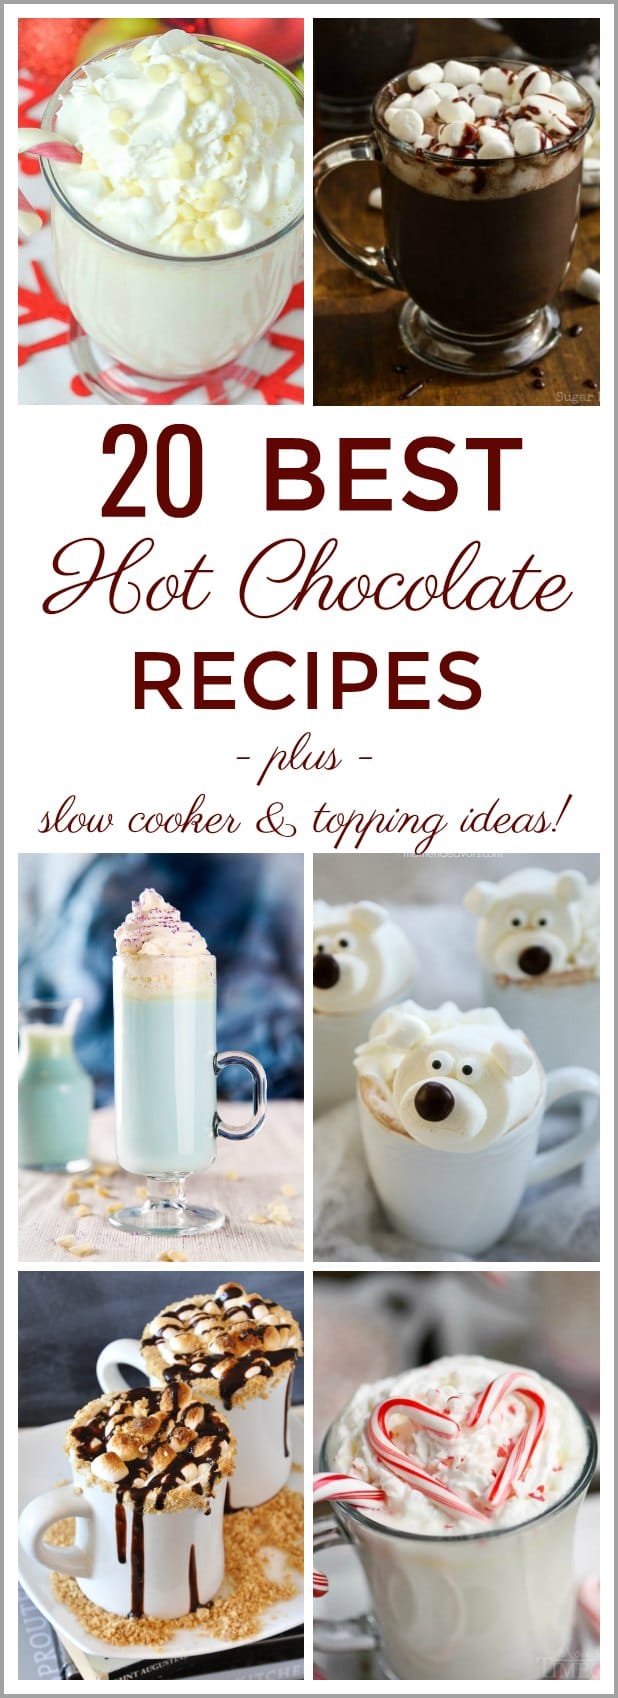 20 Best Hot Chocolate Recipes - for the kids and family. 